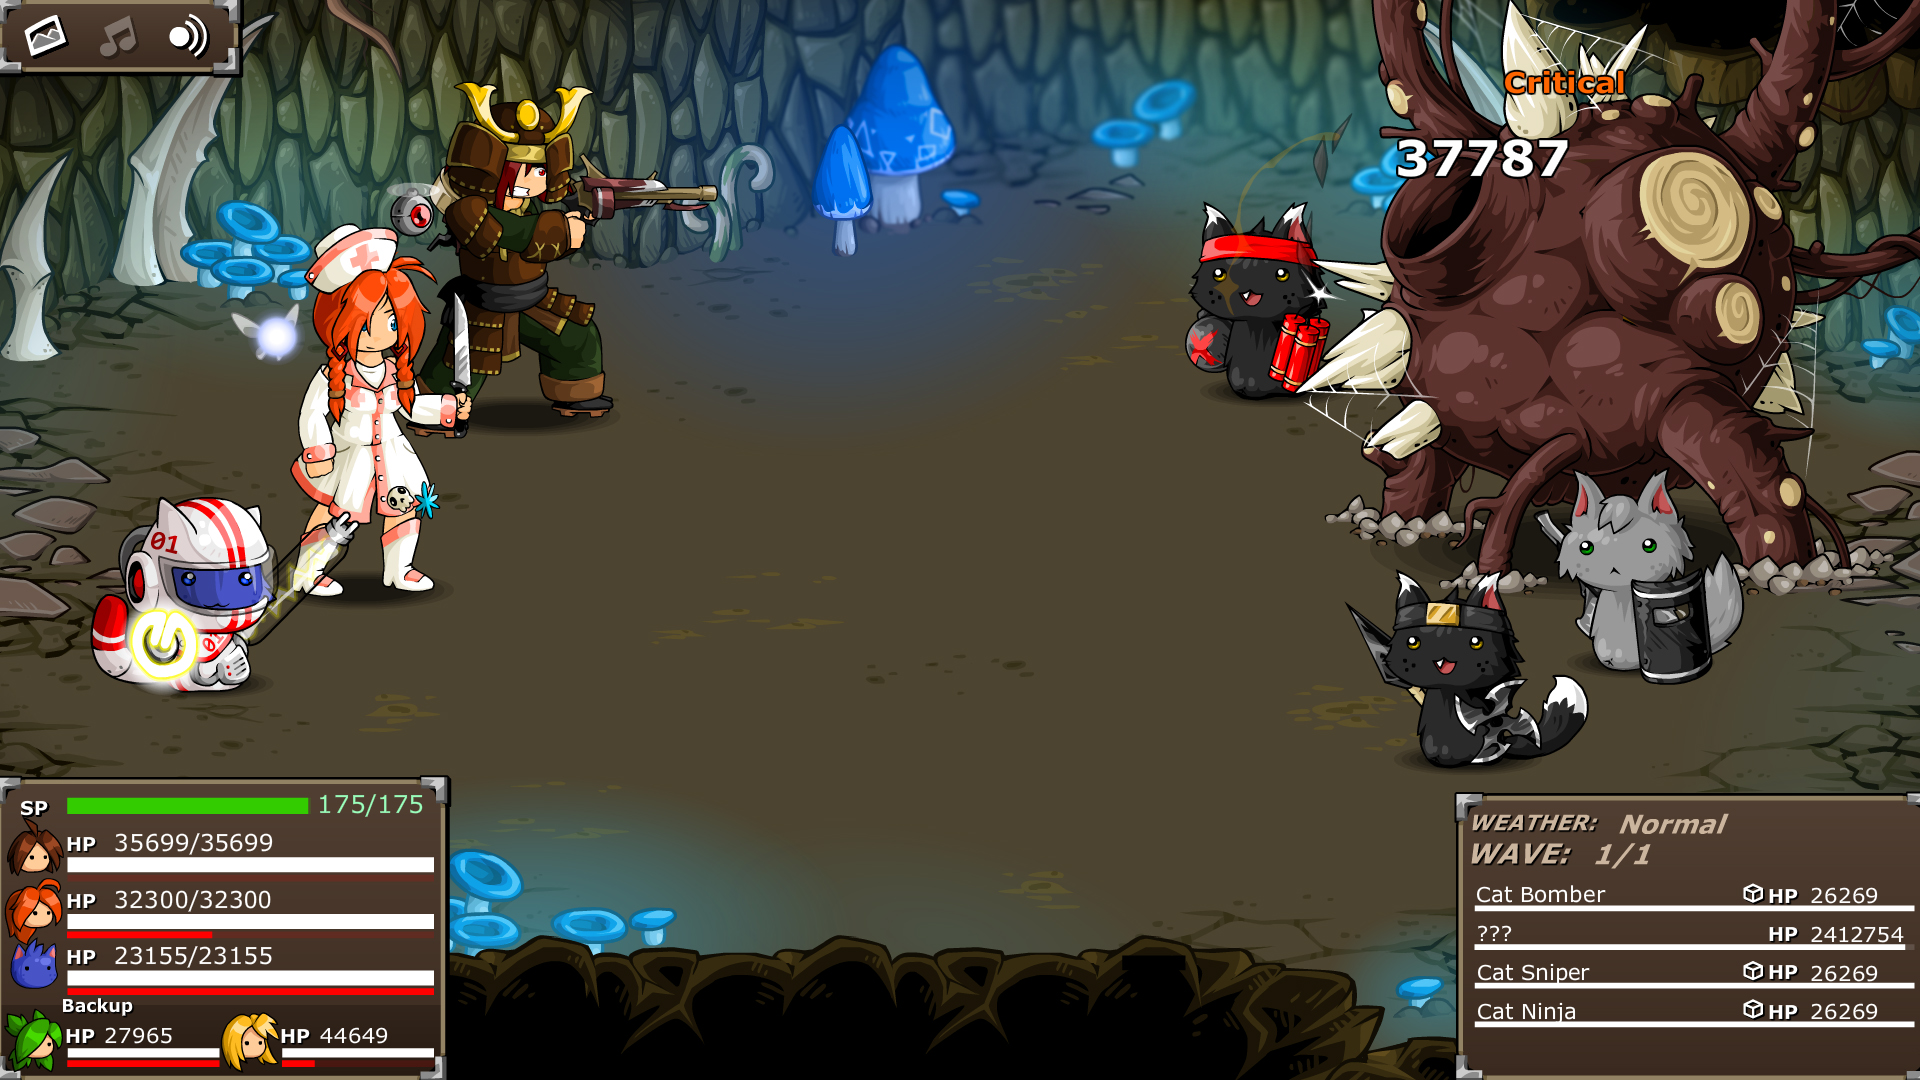 Epic Battle Fantasy 5 Epic Battle Fantasy 5 On Steam The Game Offers You An Epic World Full